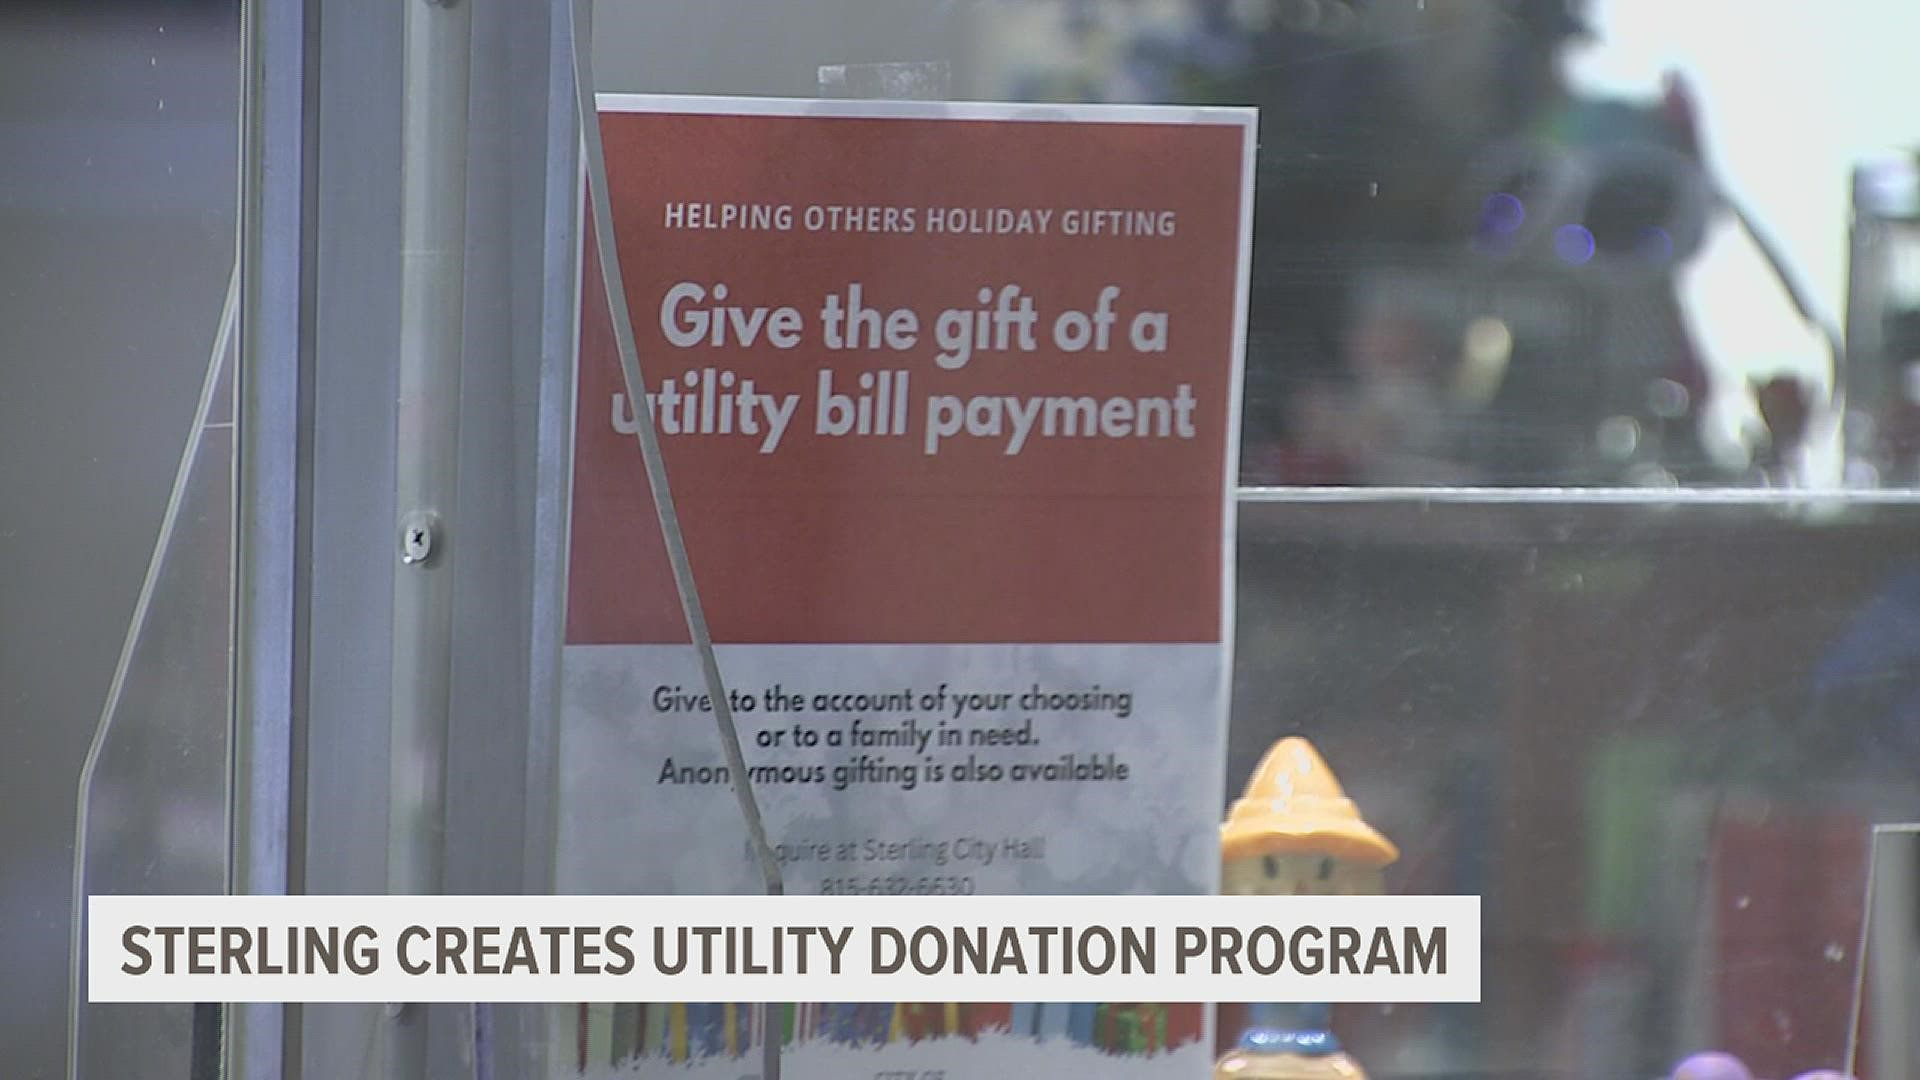 For the first time, Sterling is taking donations that will be used towards paying utility bills to those in need